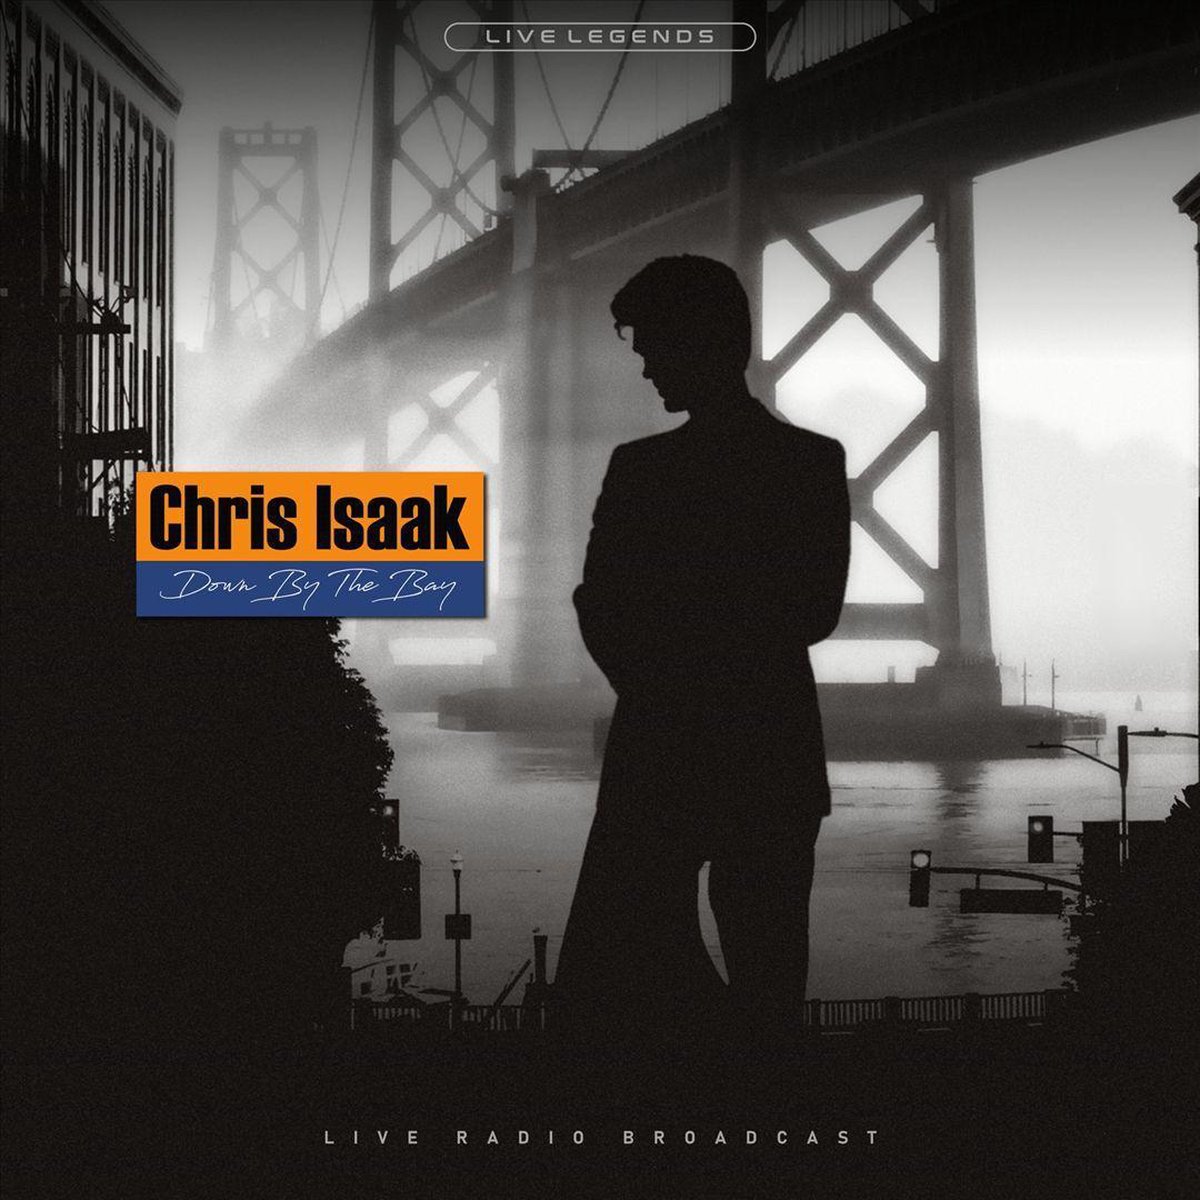 Chris Isaak - Down By the Bay - Coloured Vinyl - LP - Chris Isaak